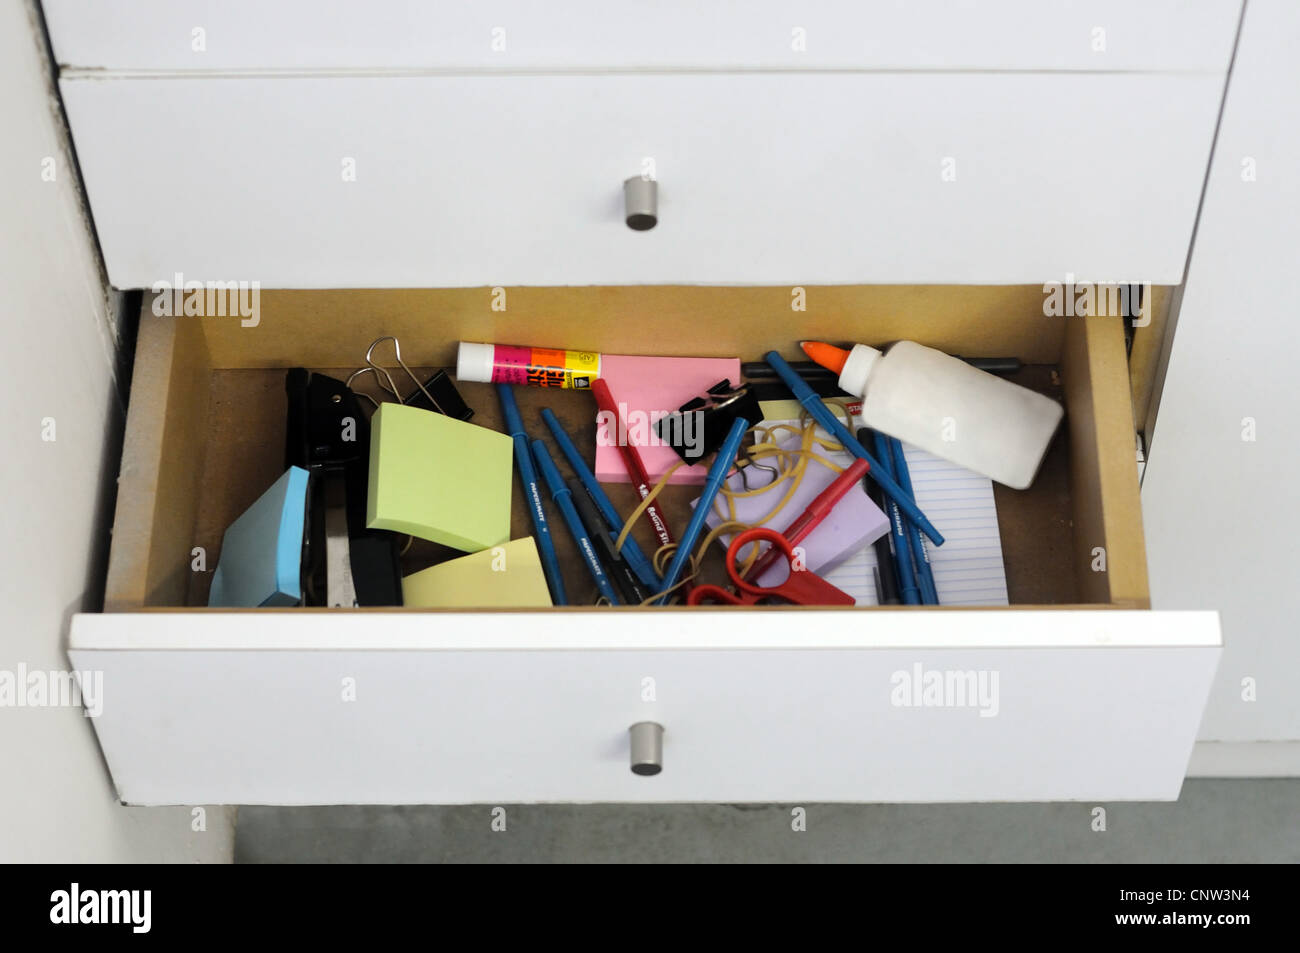 A before and after view of a clean and messy drawer. Stock Photo